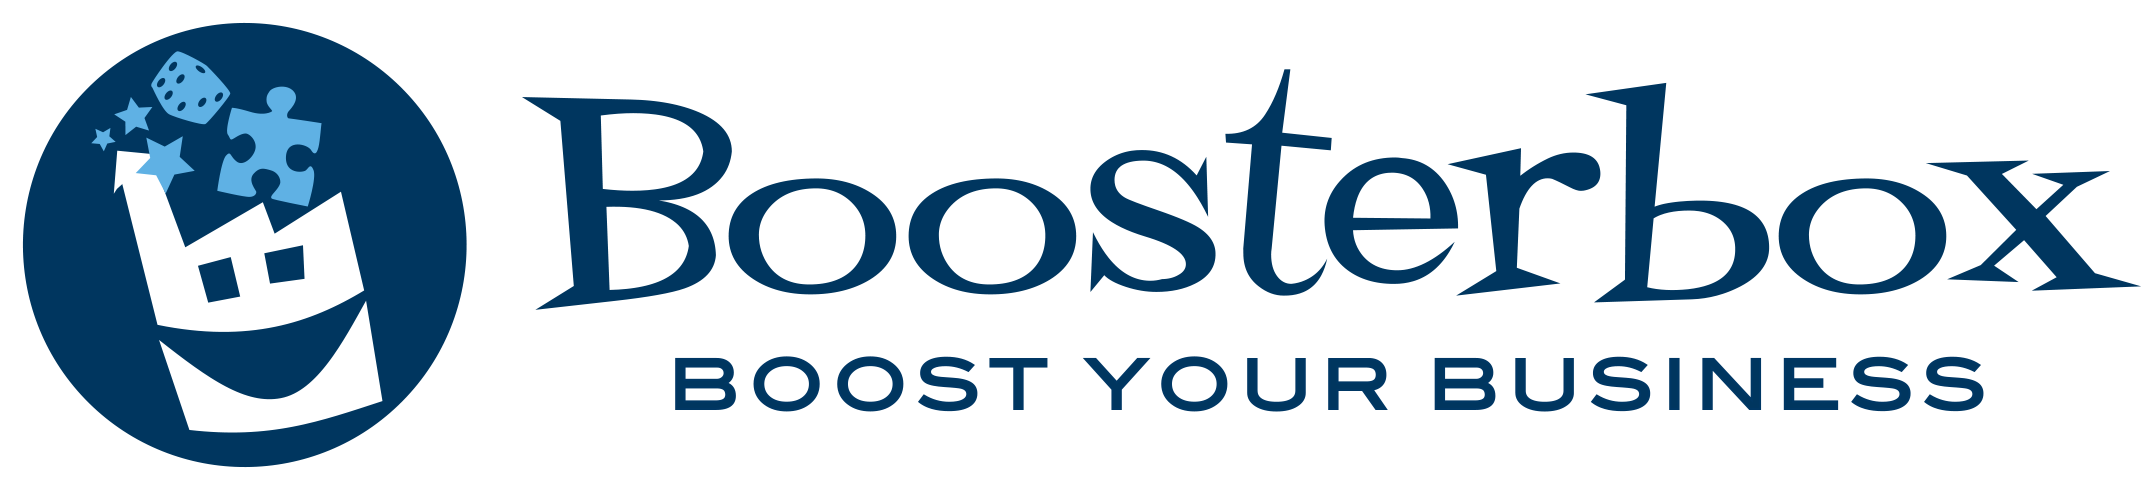 Boosterbox - Reseller for bestsellers